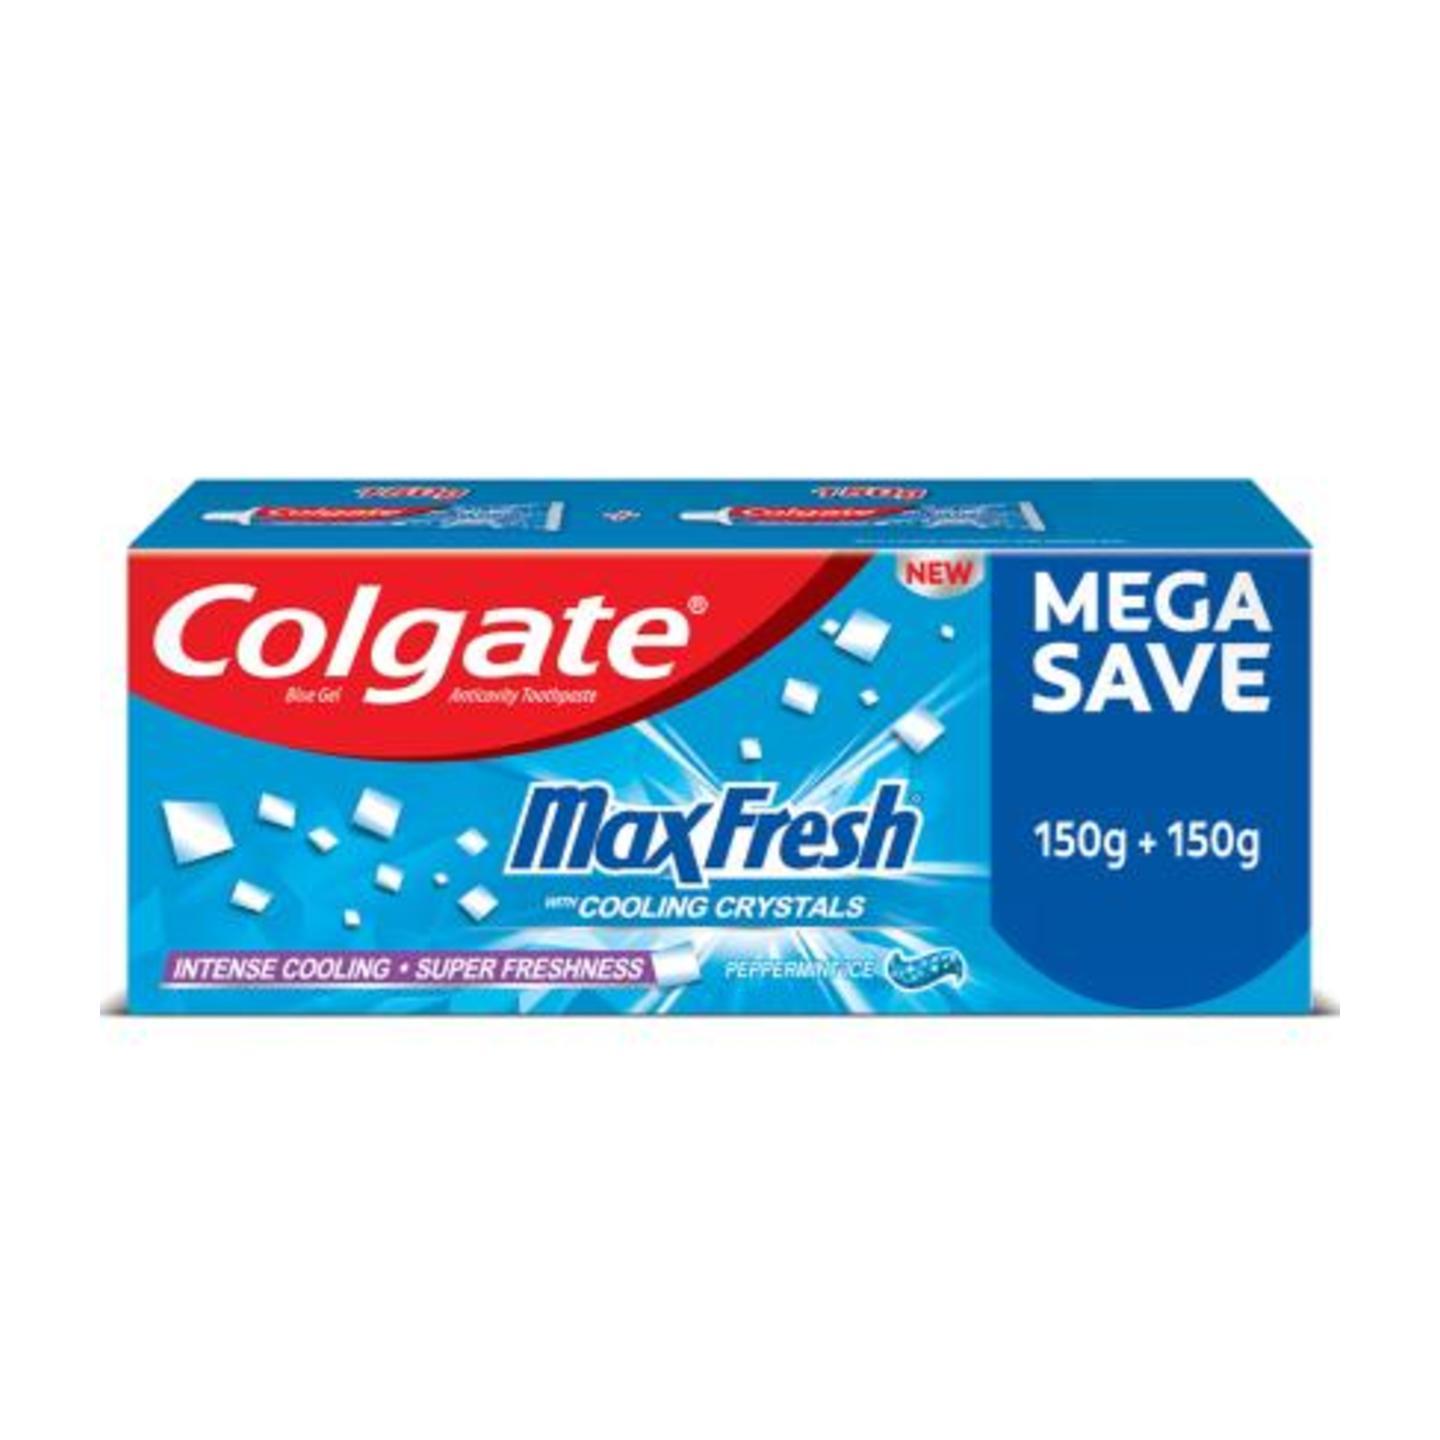 Colgate Maxfresh Peppermint Ice Blue Anticavity Toothpaste 150 g (Pack of 2) PM/BM 0.15/18